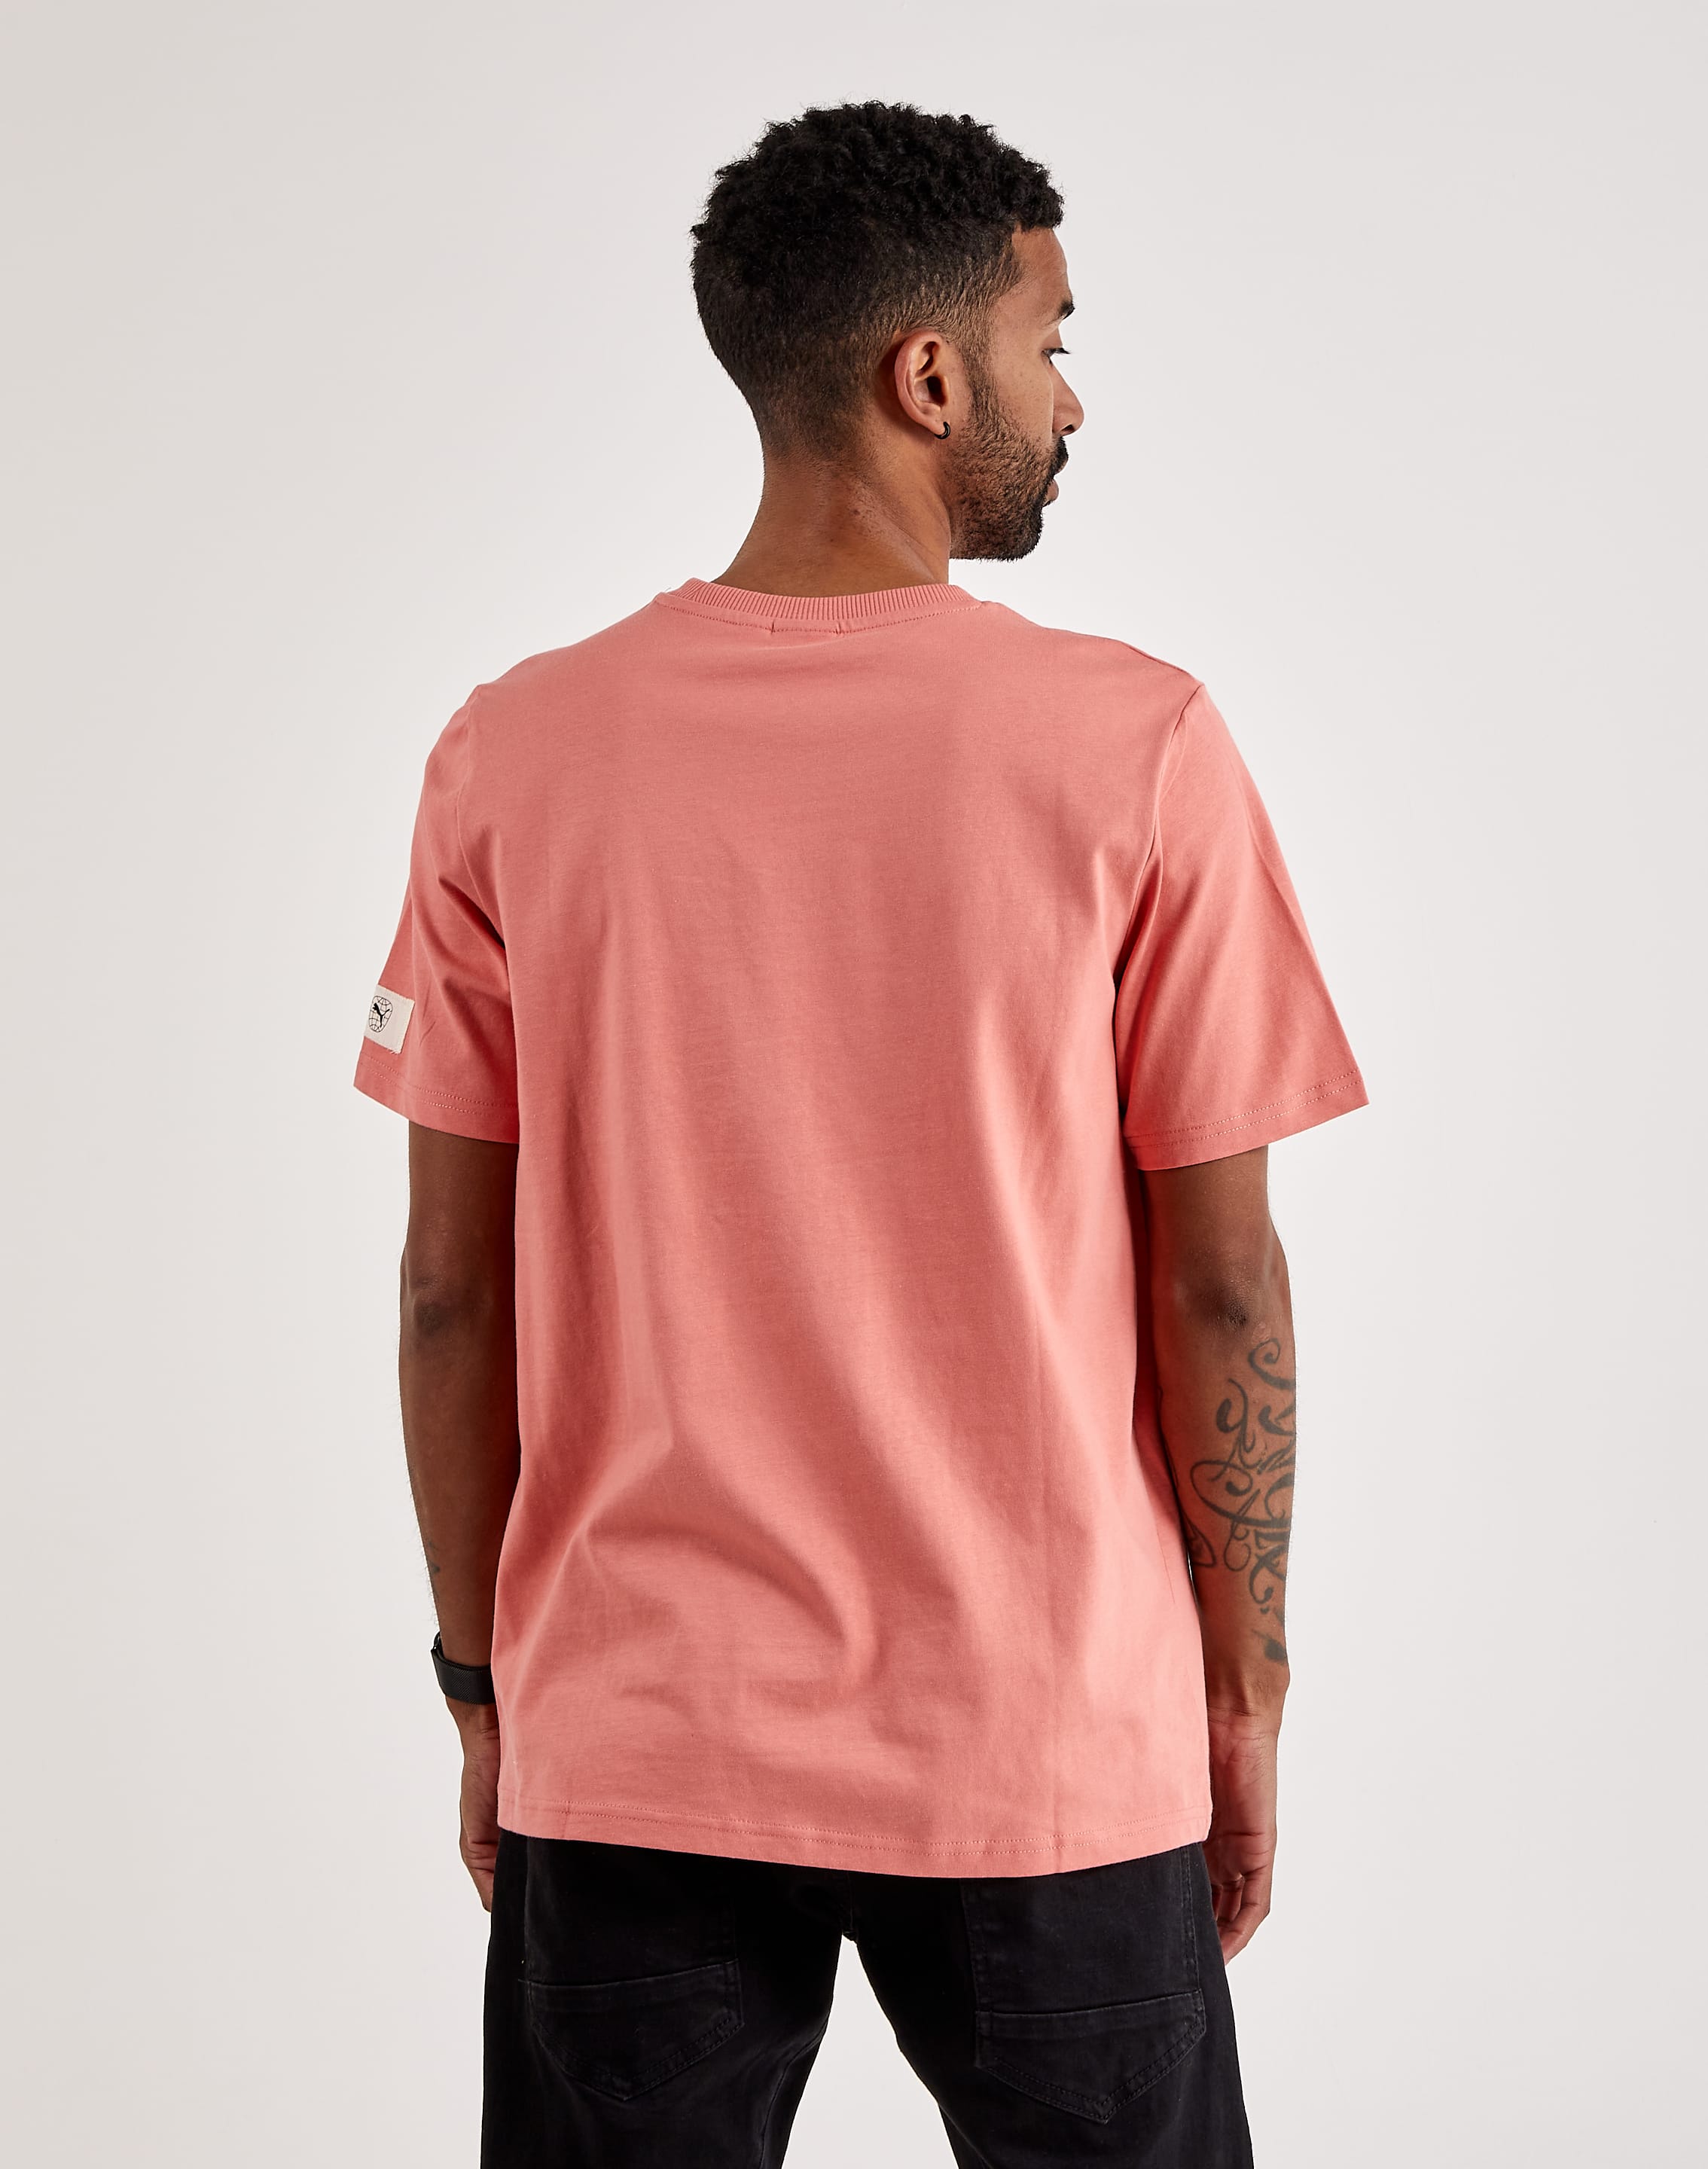 Tee – Re:Escape Puma DTLR Rotate